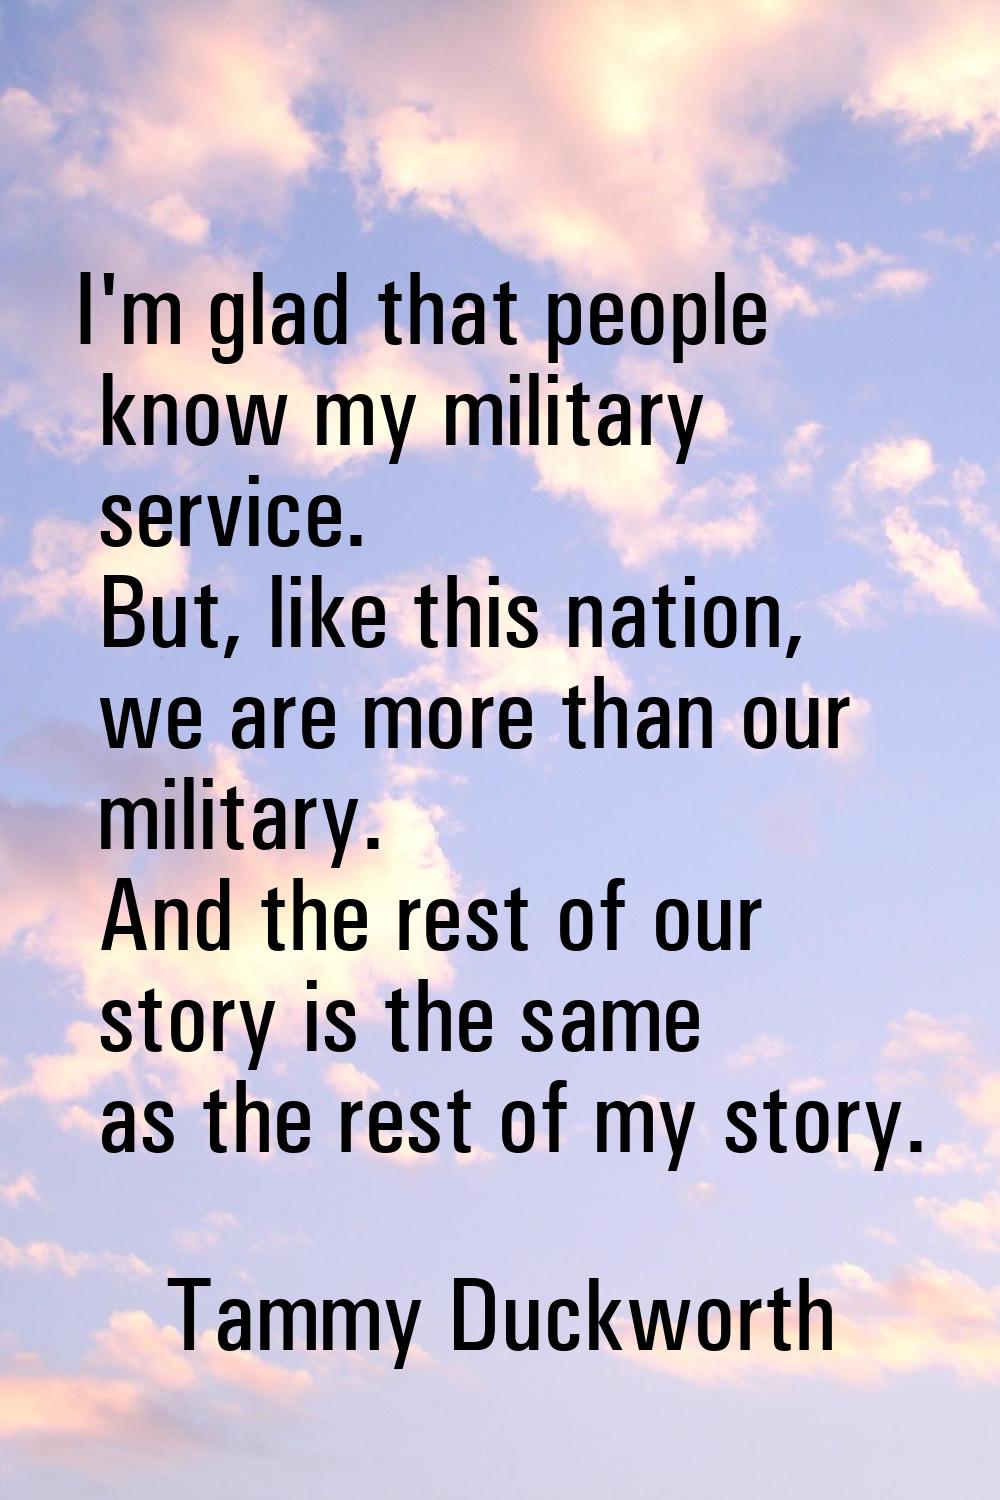 I'm glad that people know my military service. But, like this nation, we are more than our military